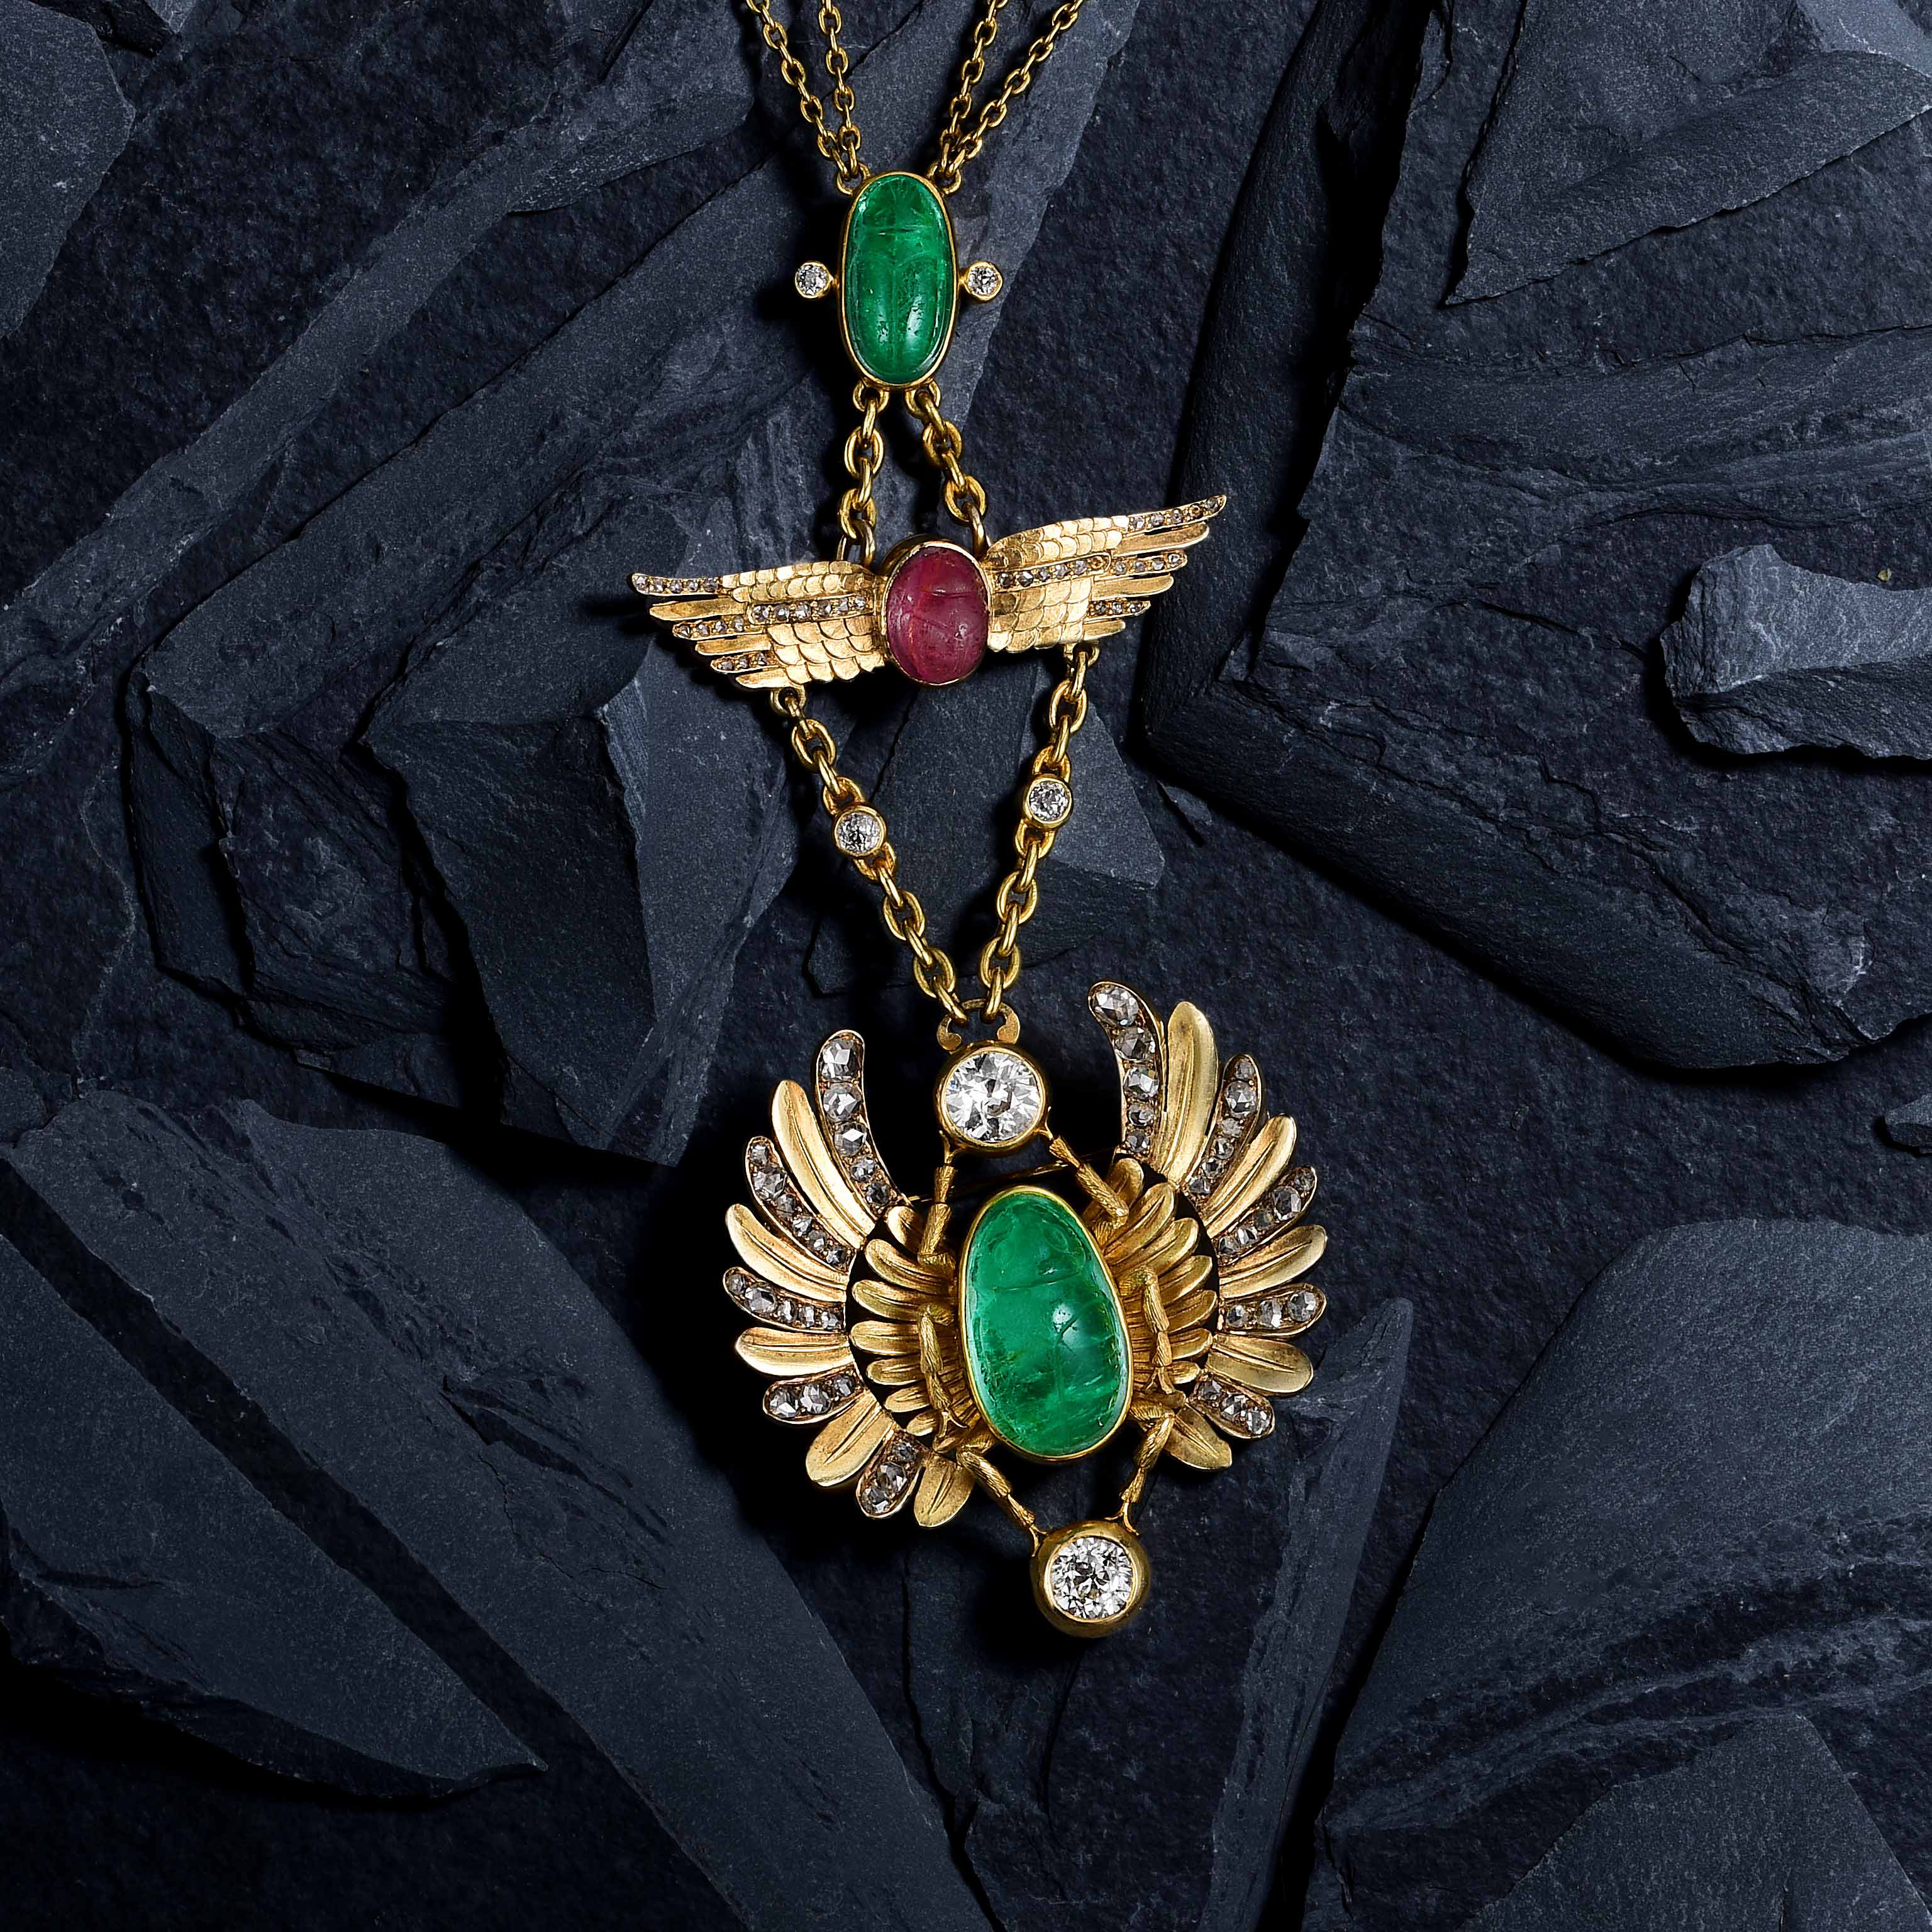 Robert and Louis Koch Egyptian Revival Necklace-Fortuna Auction NYC